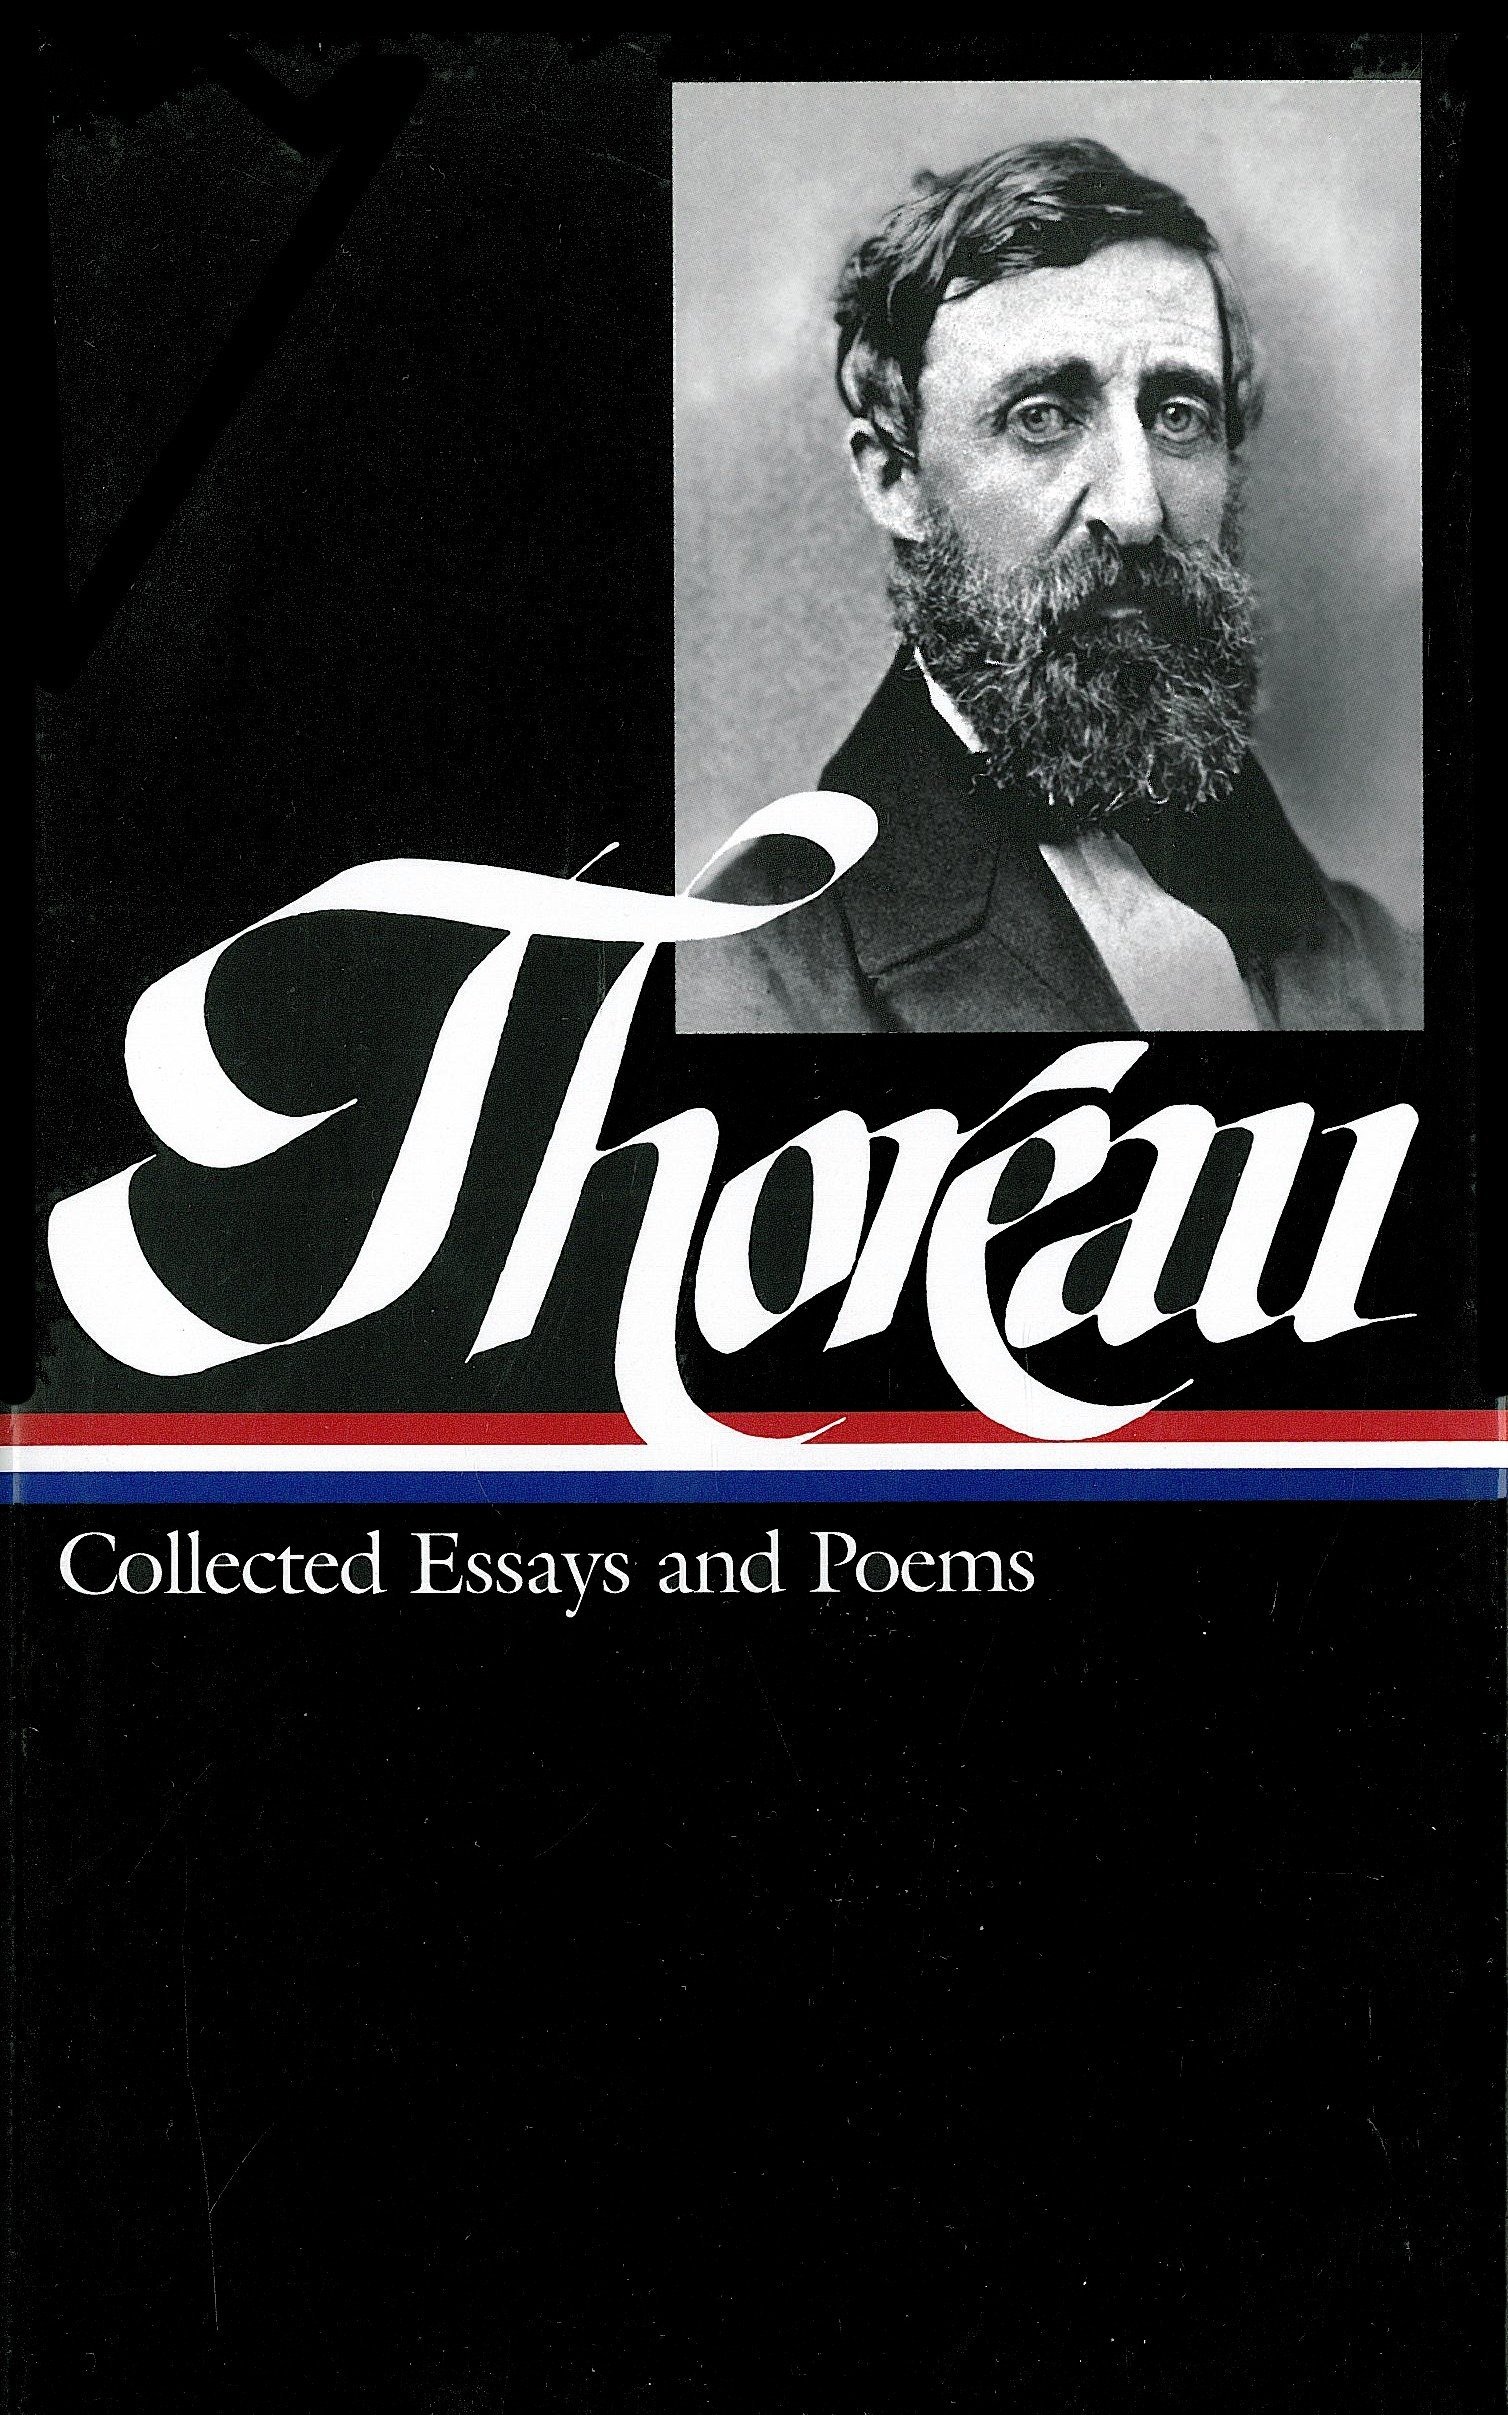 Collected Essays and Poems, by Henry David Thoreau